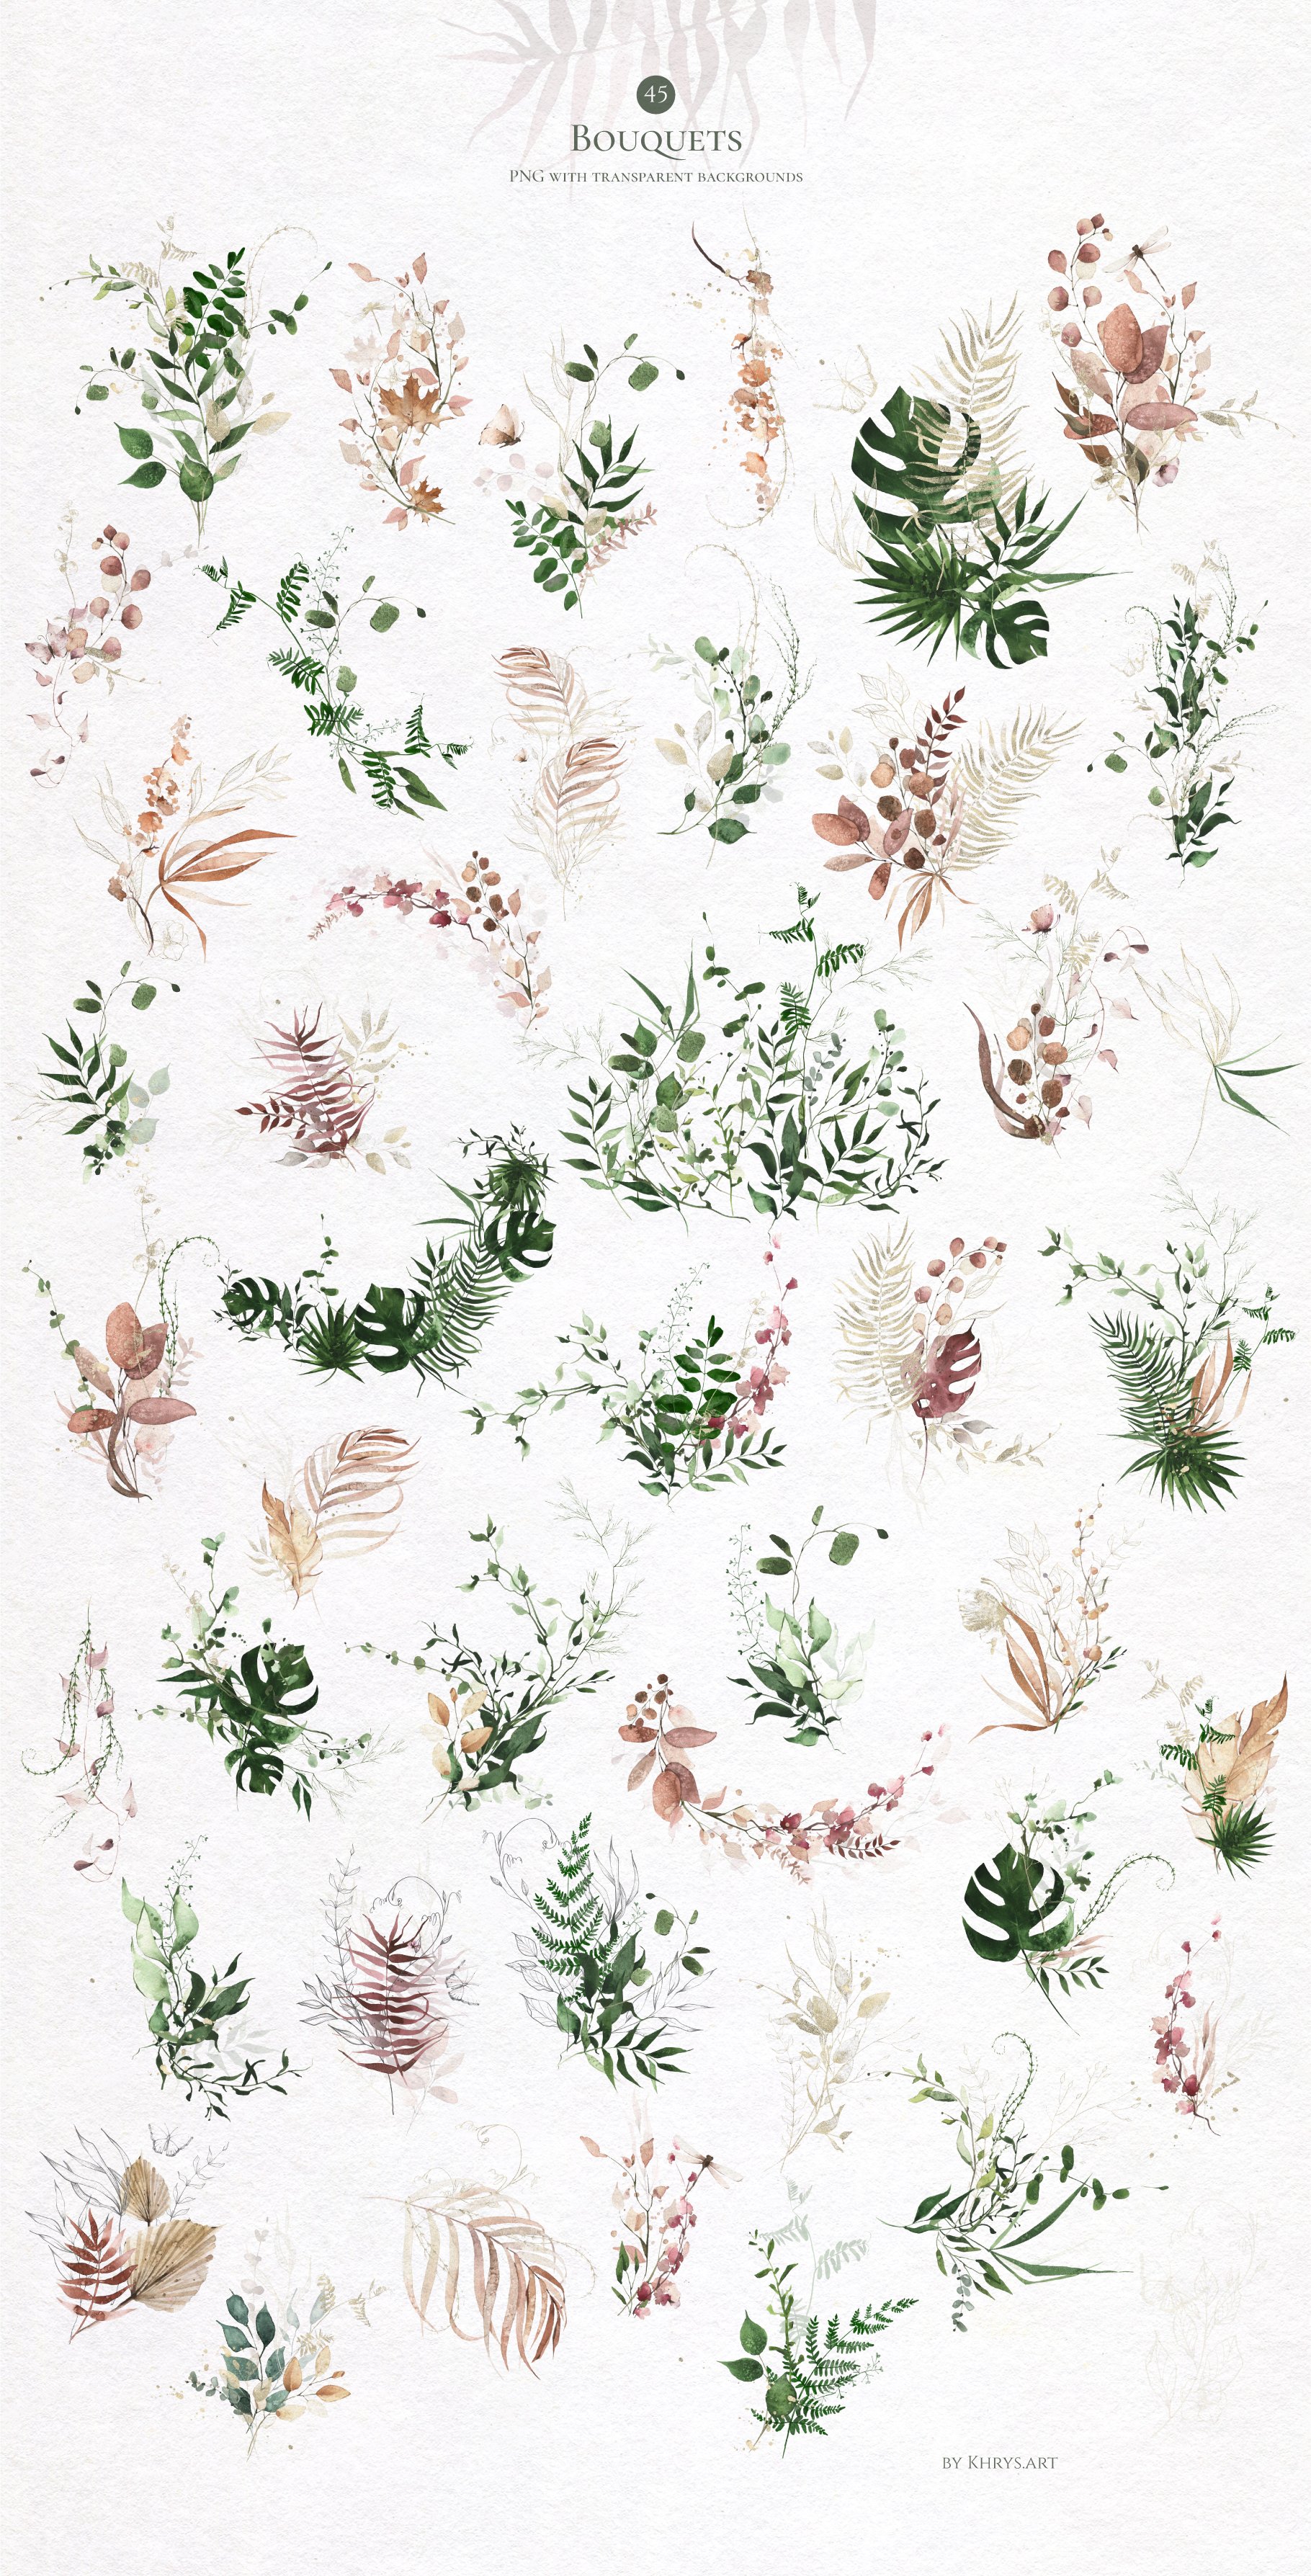 Drawing of a bunch of flowers on a white background.